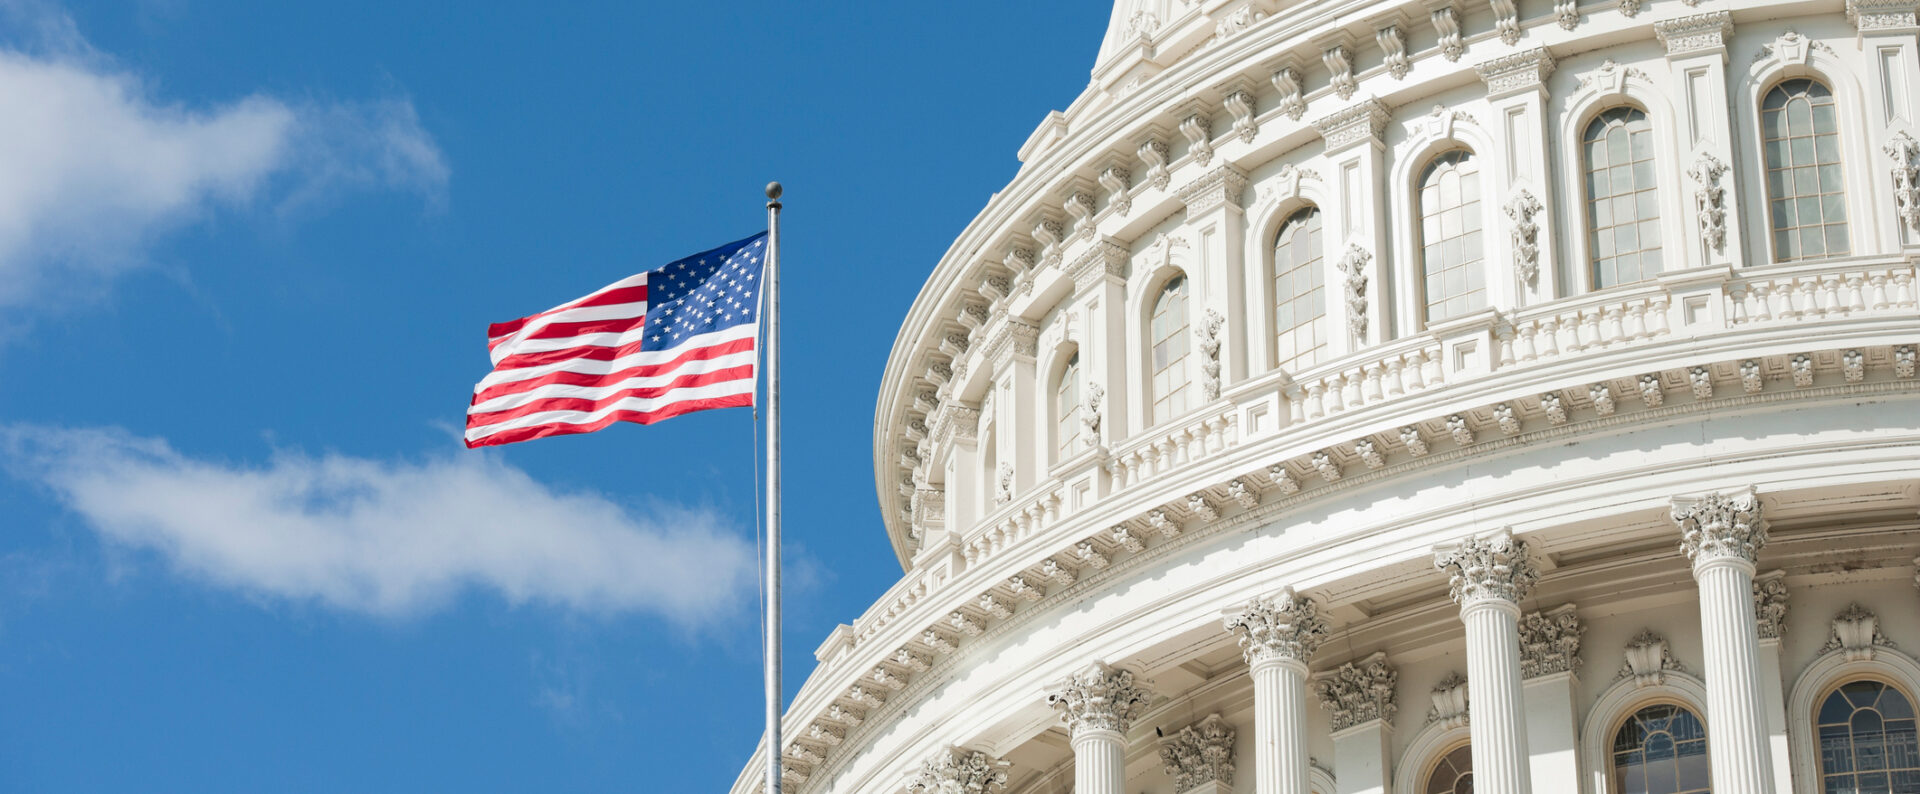 An American flag flies in front of a government building. EcoScribe provides audio transcription nationwide.